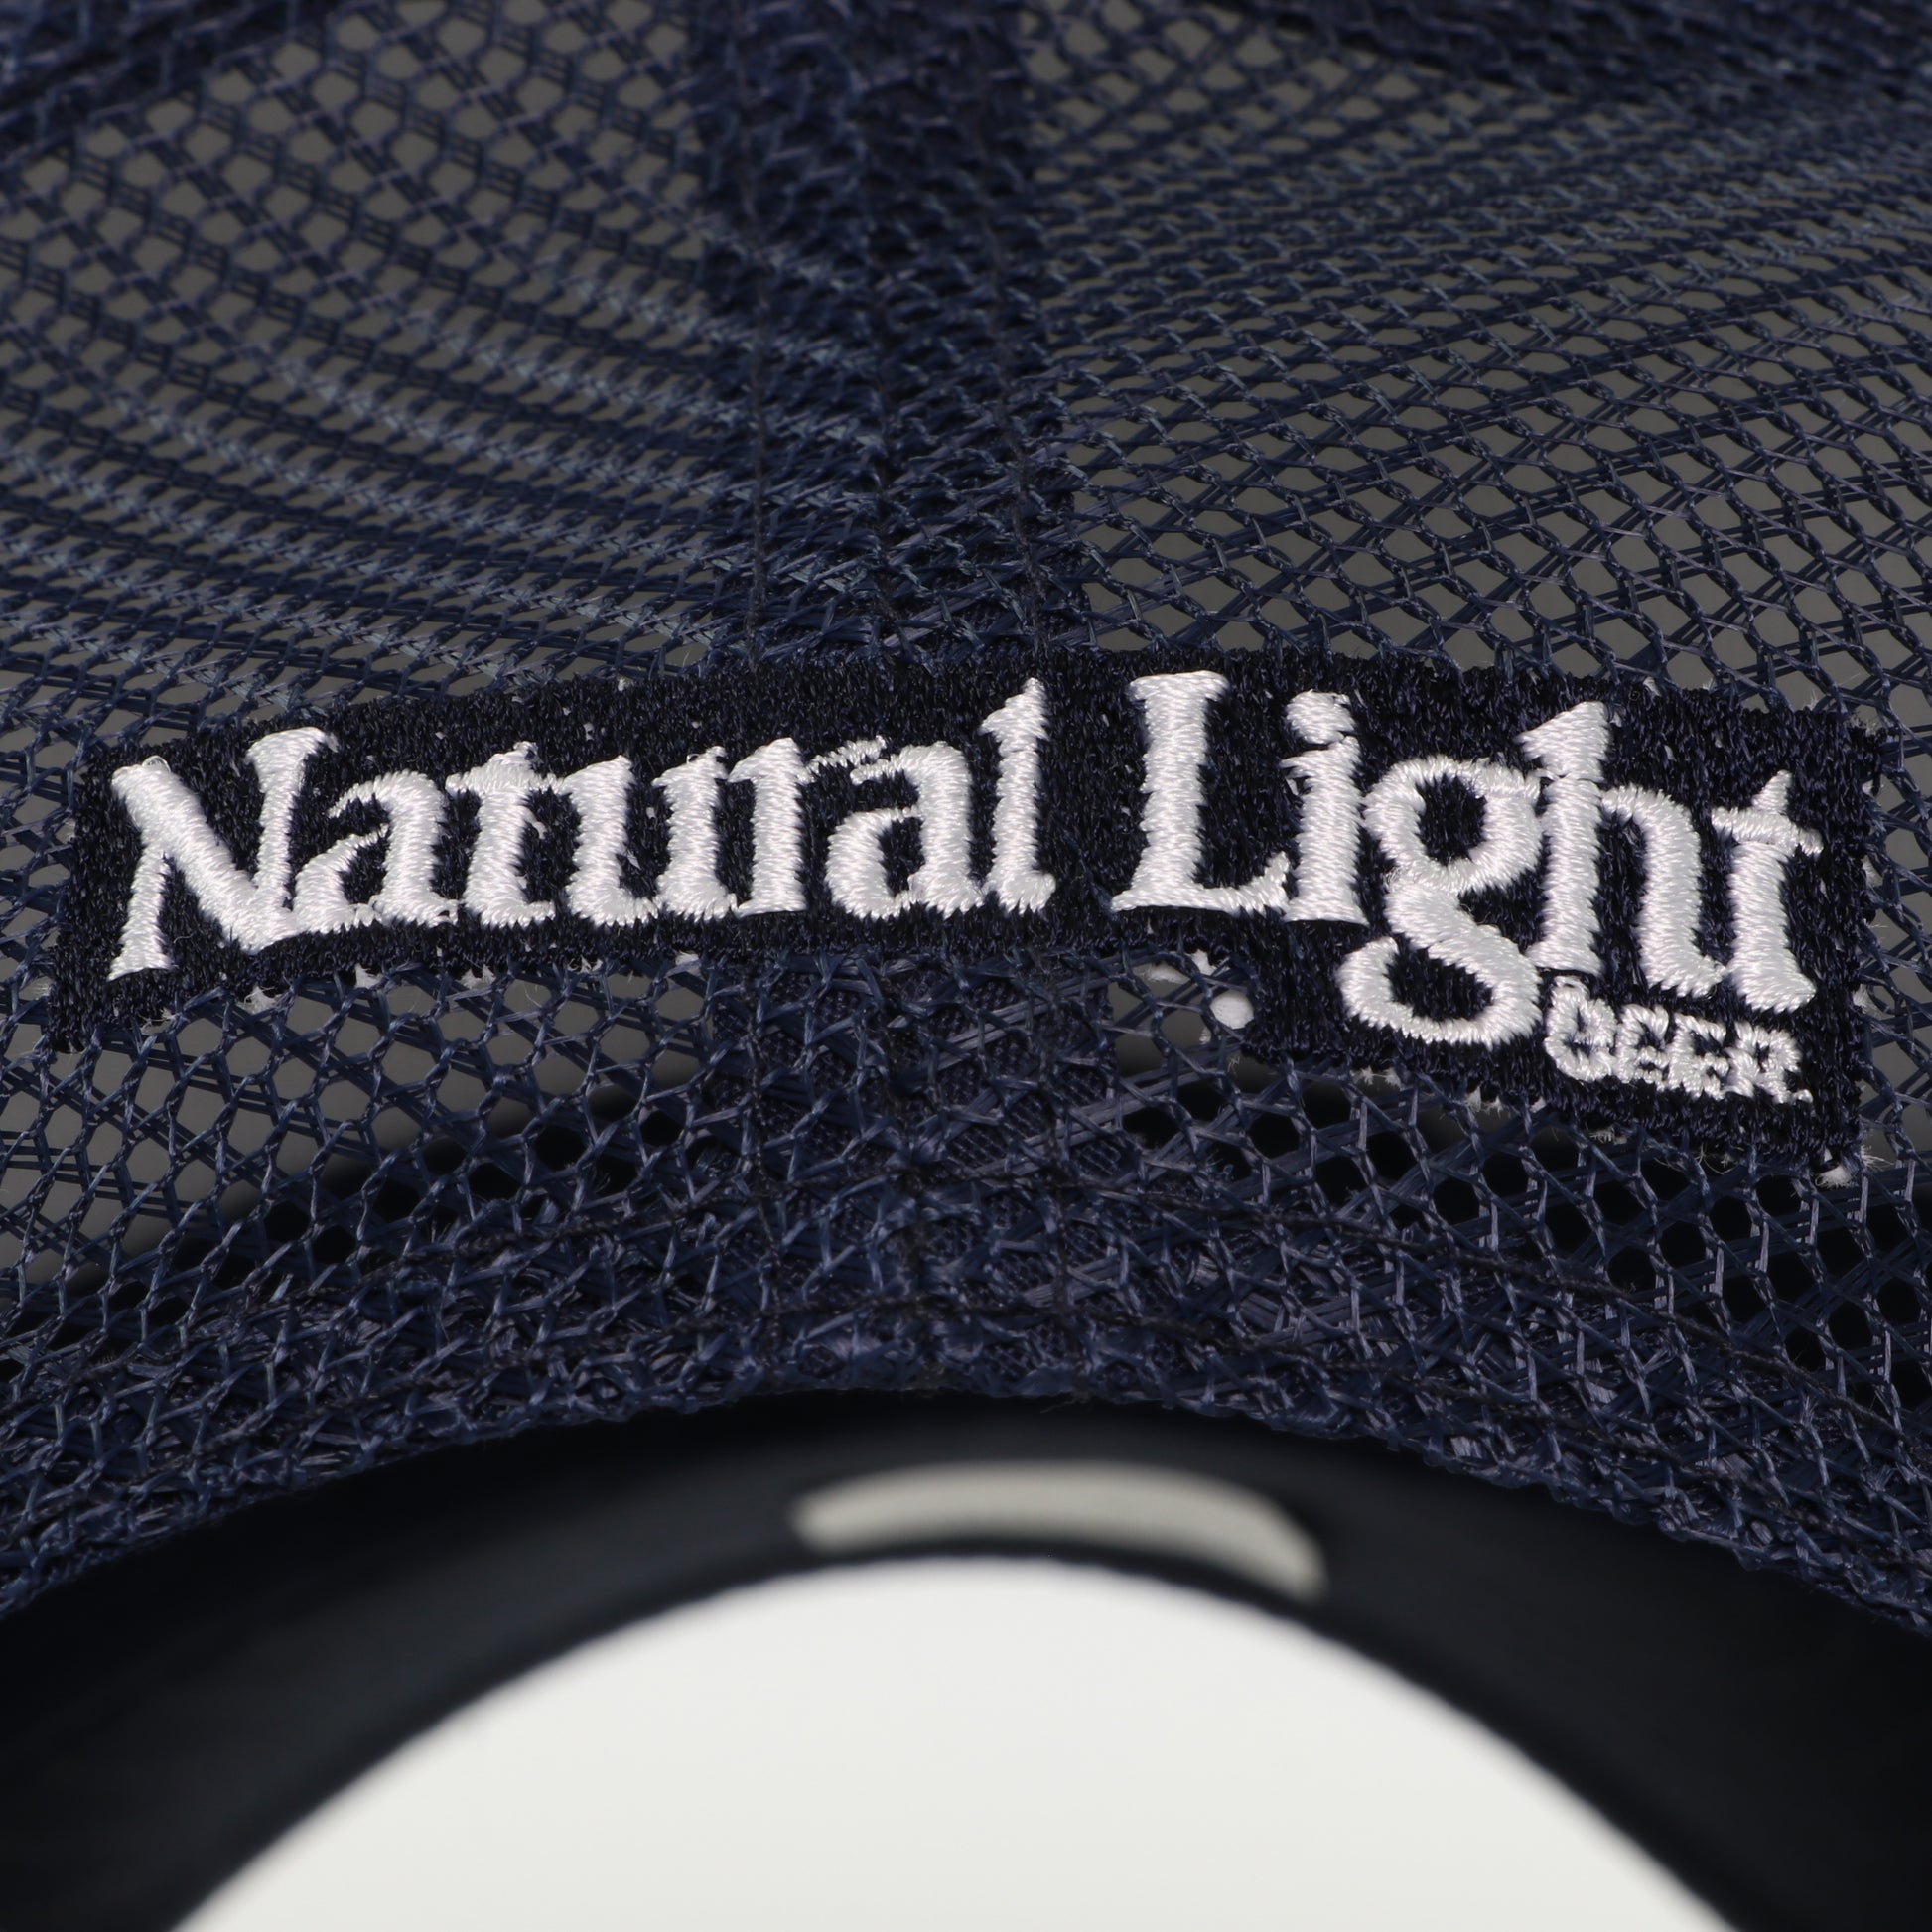 Close up of back logo on "Save Water Drink Natty" Trucker Hat